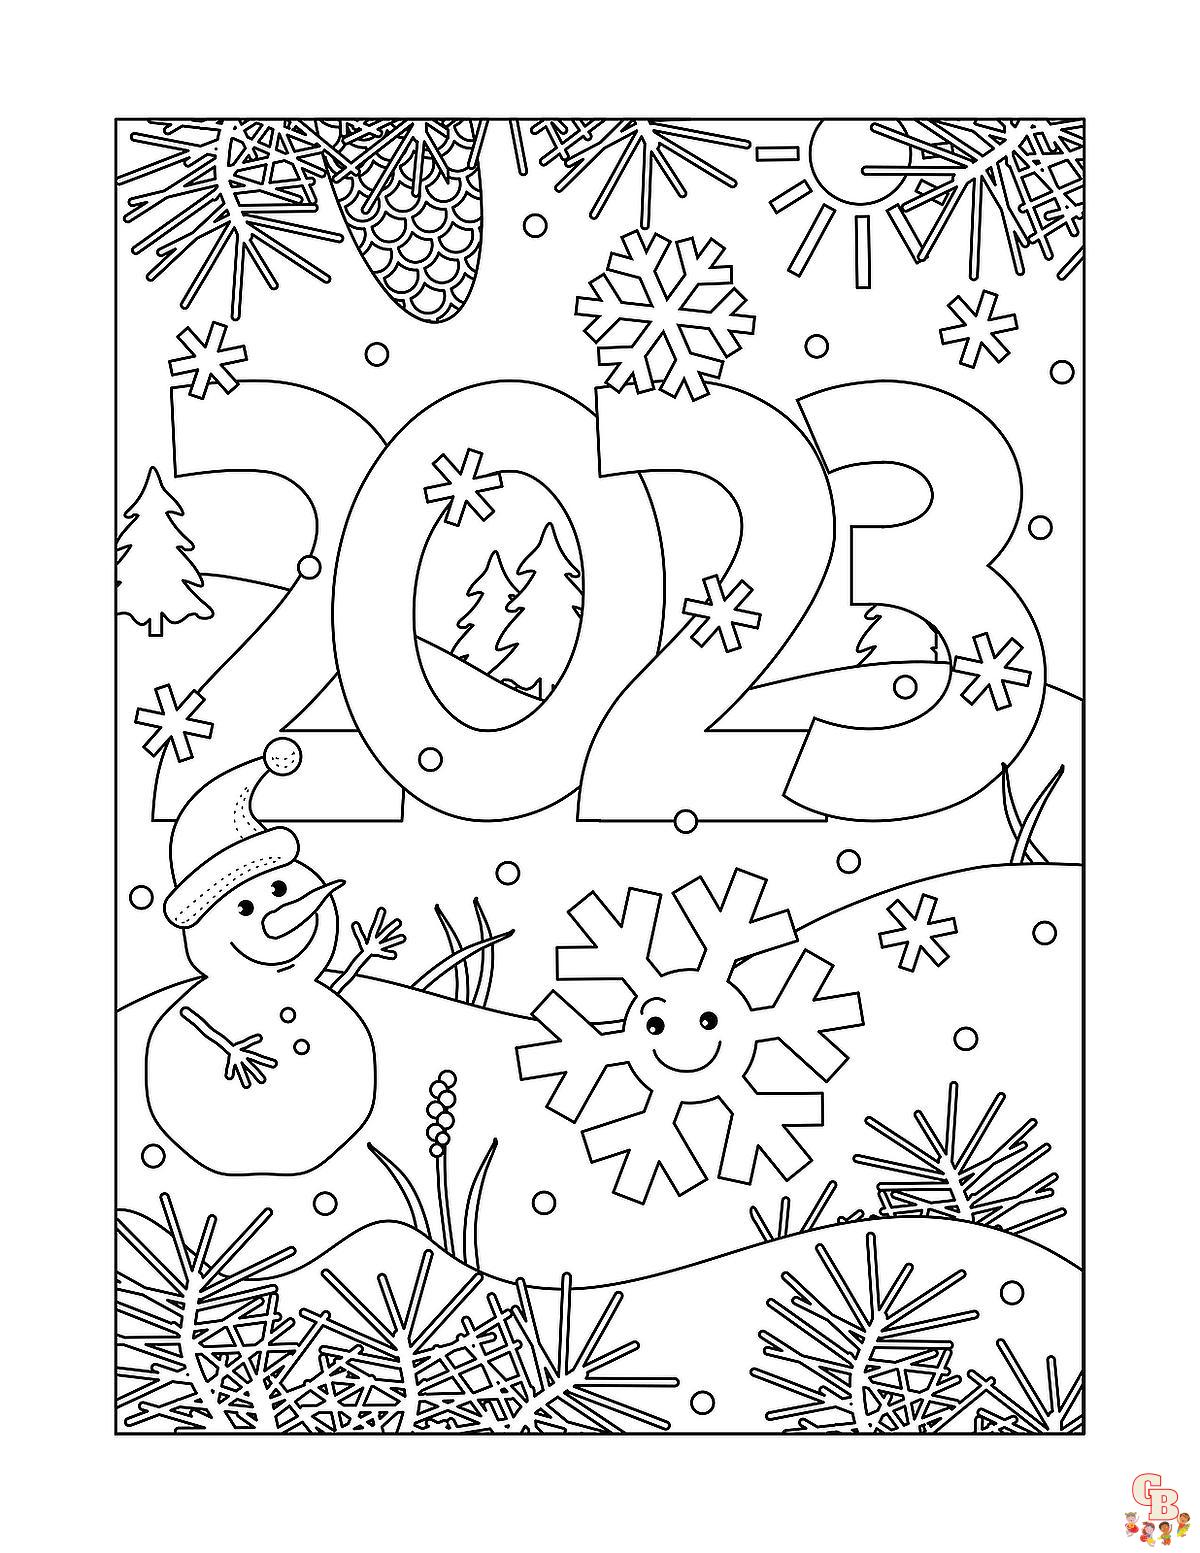 2022 Coloring Pages for Kids Fun Free 2022 Printab 11769 c551868e48 1672240130